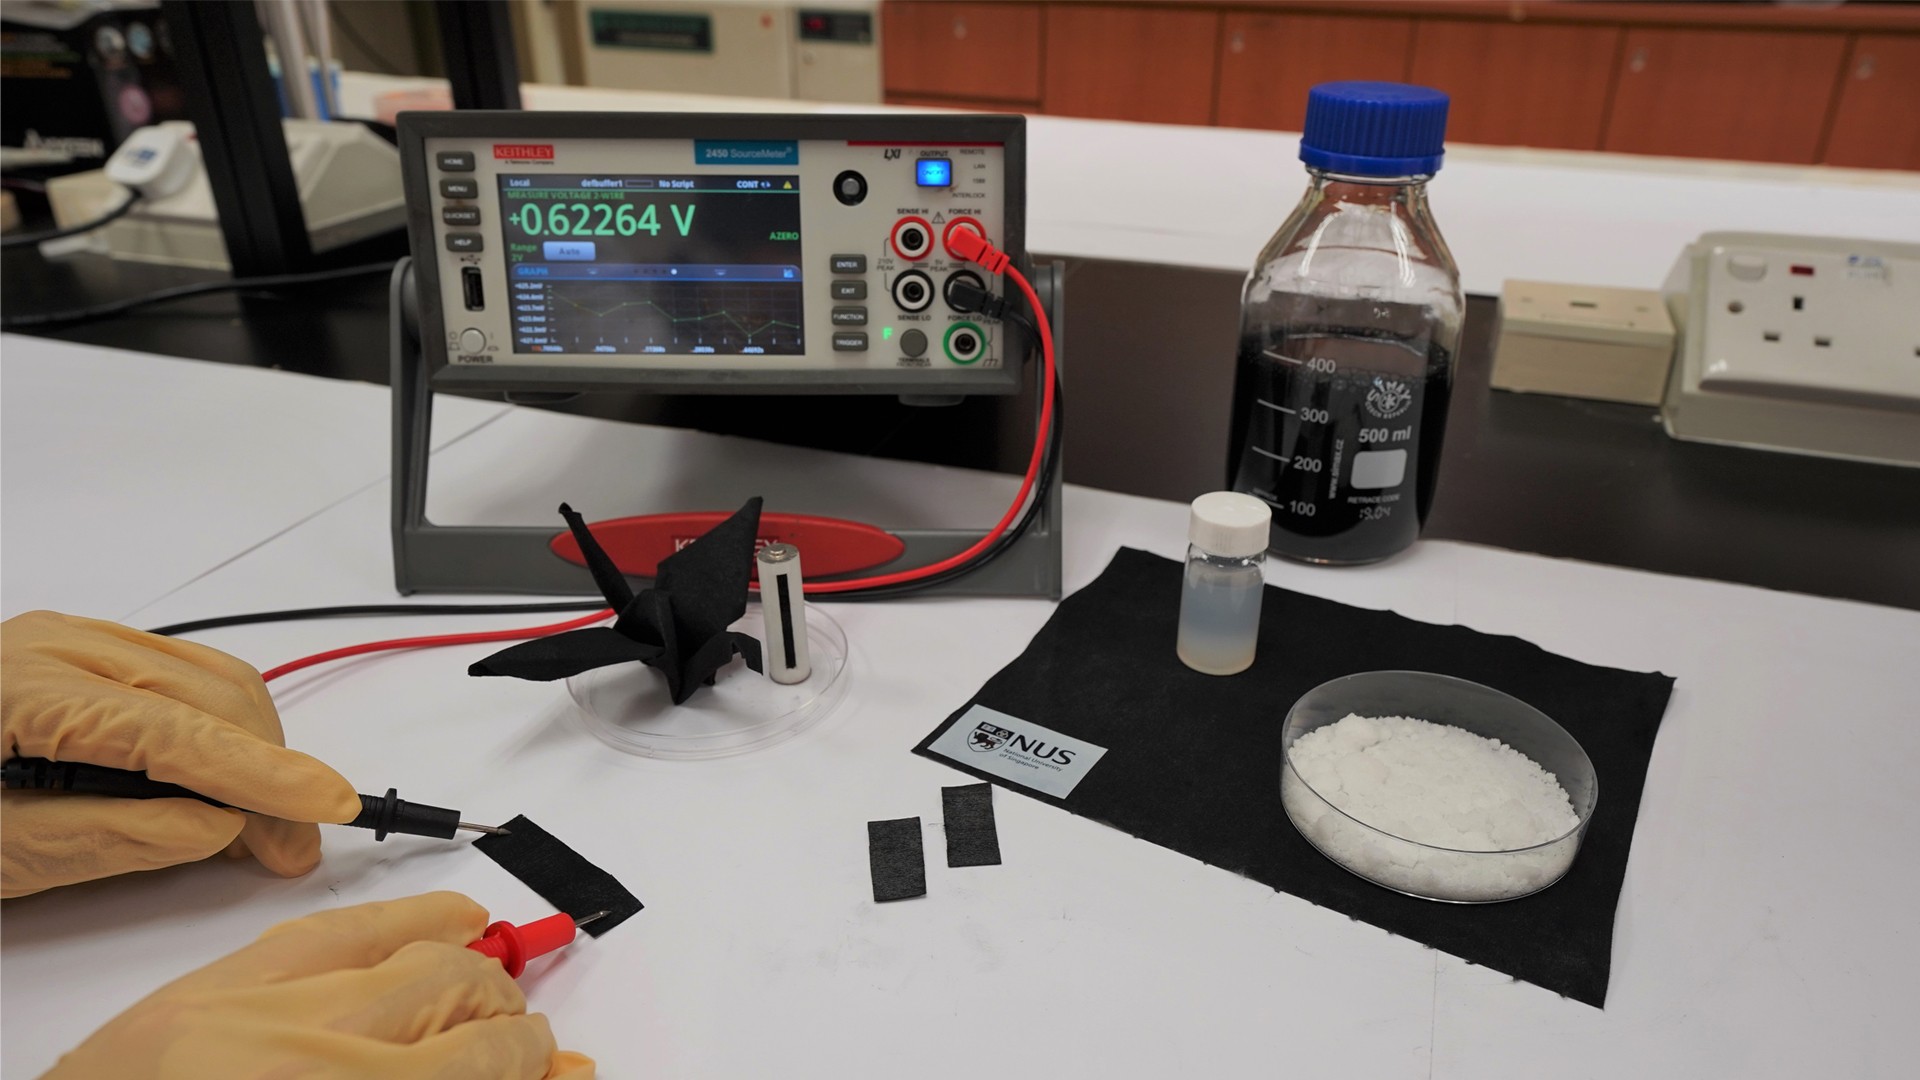 The new moisture-driven electricity generation device invented by NUS researchers capitalises on the difference in moisture content of the wet and dry regions of the carbon-coated fabric to create an electric current. Sea salt is used as a moisture absorbent for the wet region.